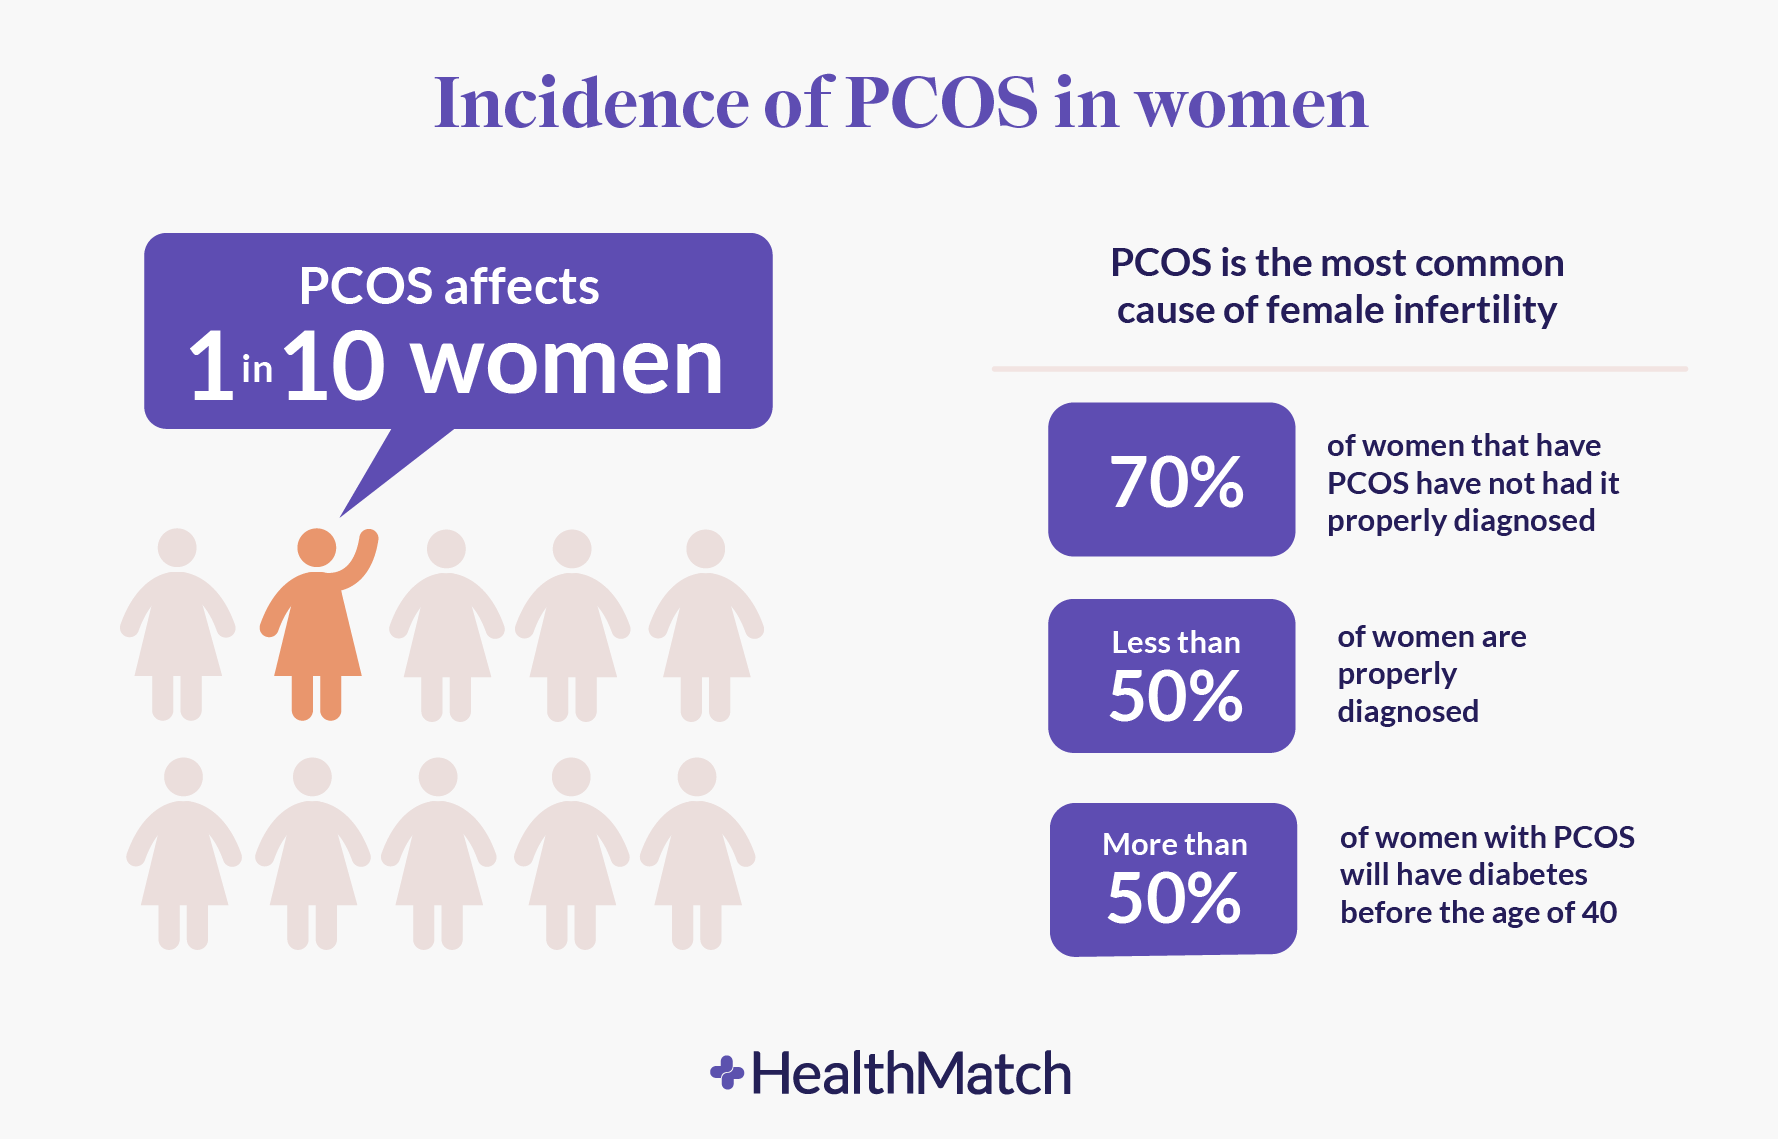 HealthMatch Infertility linked to Polycystic Ovary Syndrome (PCOS) in